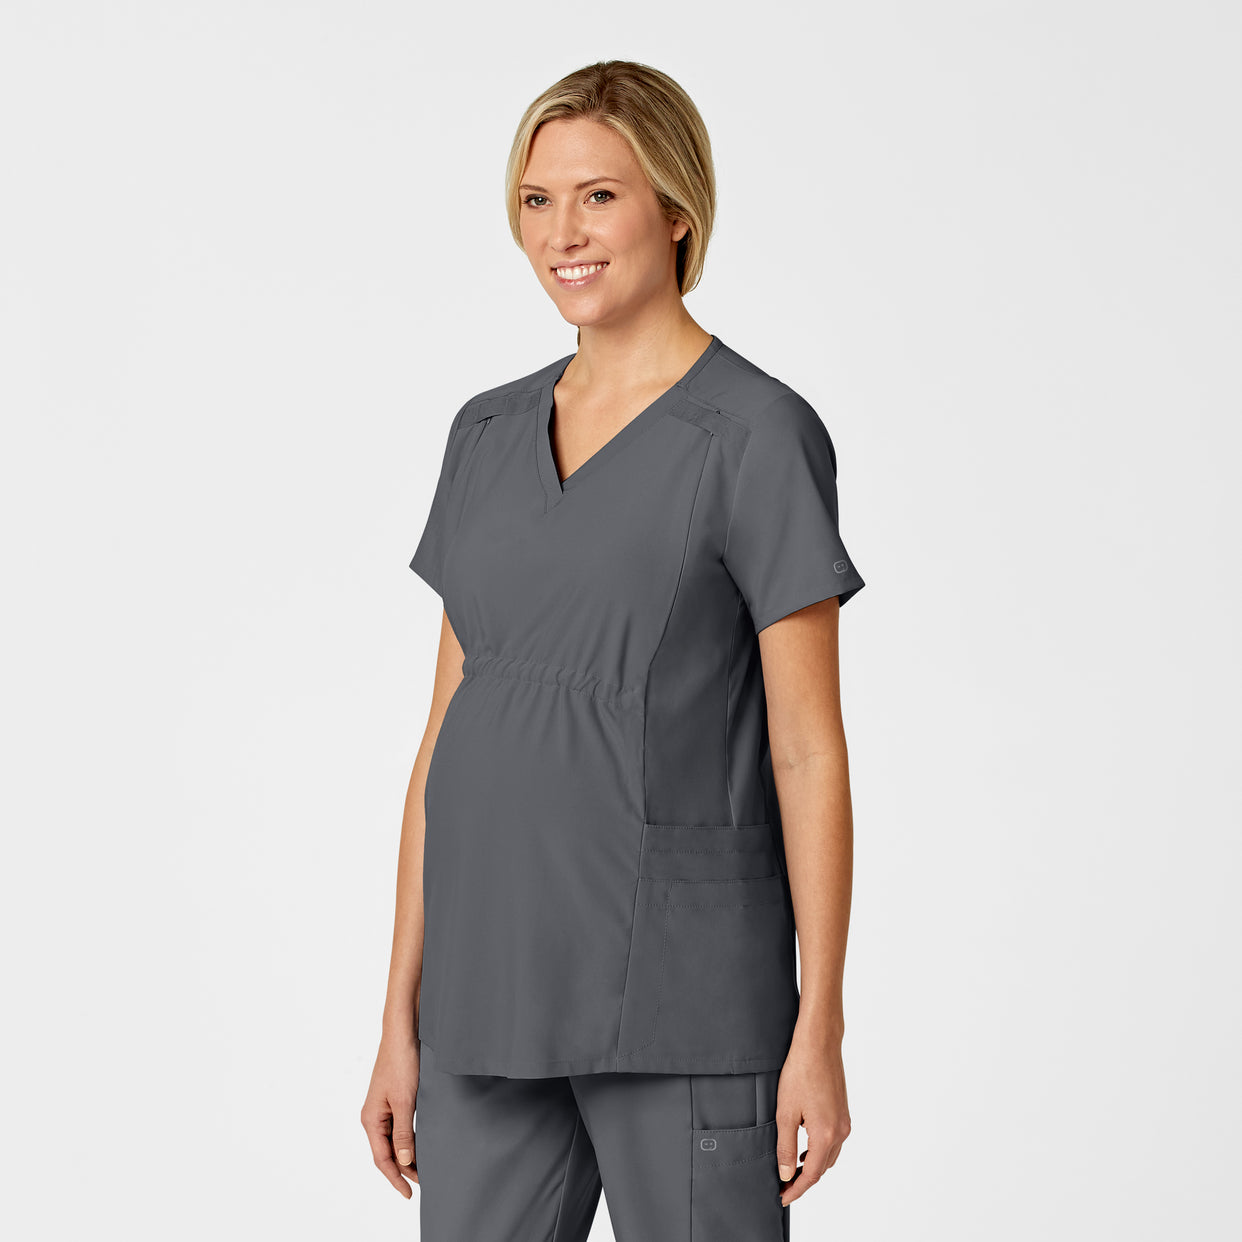 W123 Maternity V-Neck Scrub Top Pewter side view